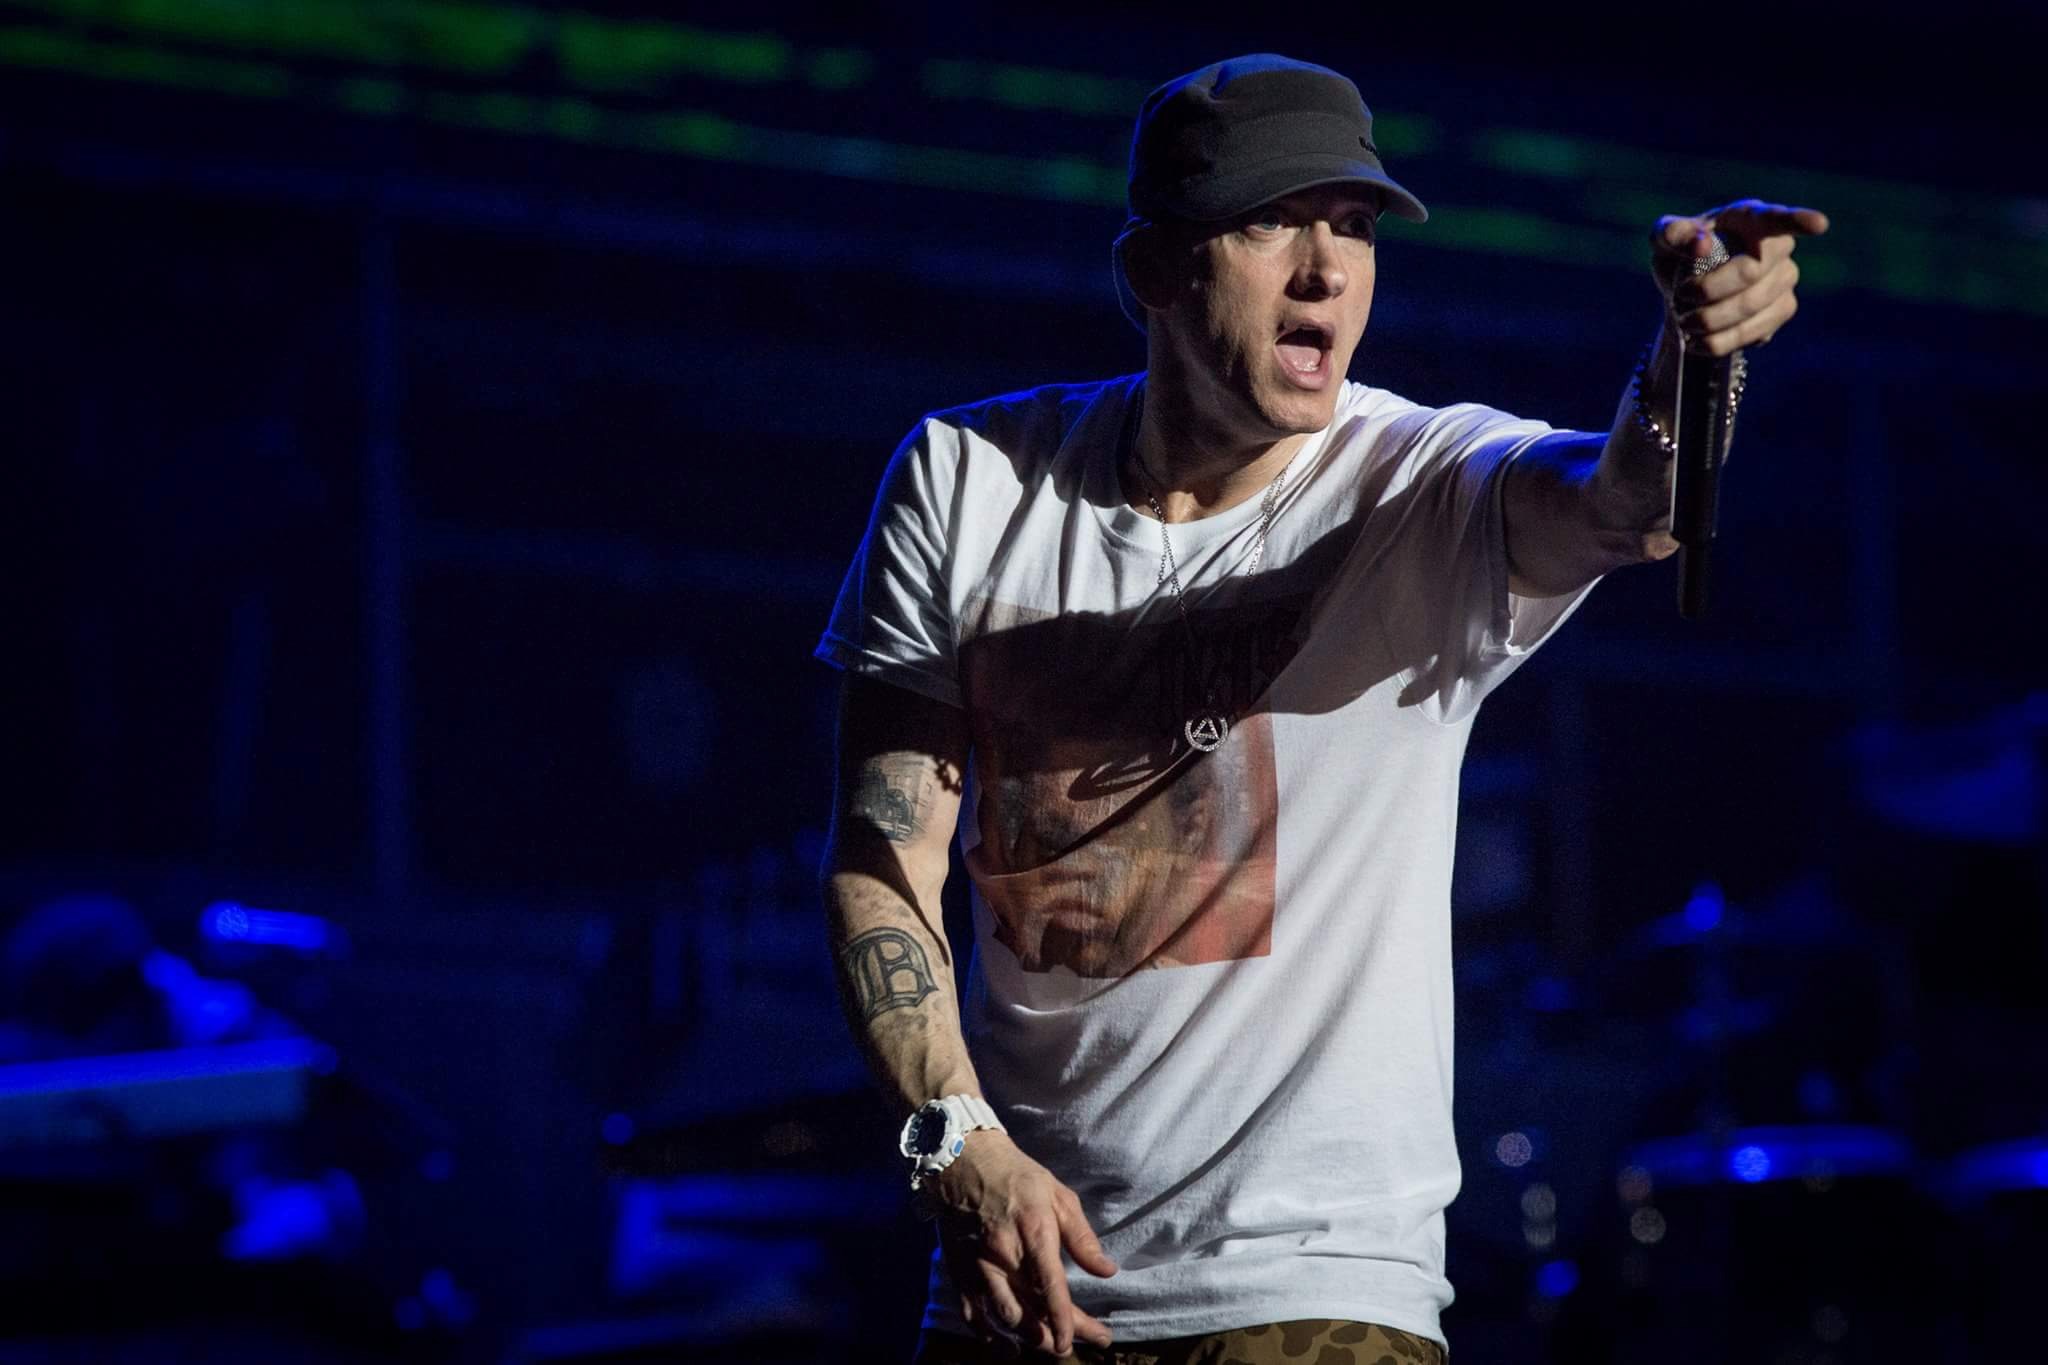 Download Eminem Hd Wallpapers 1080p On Itl.cat